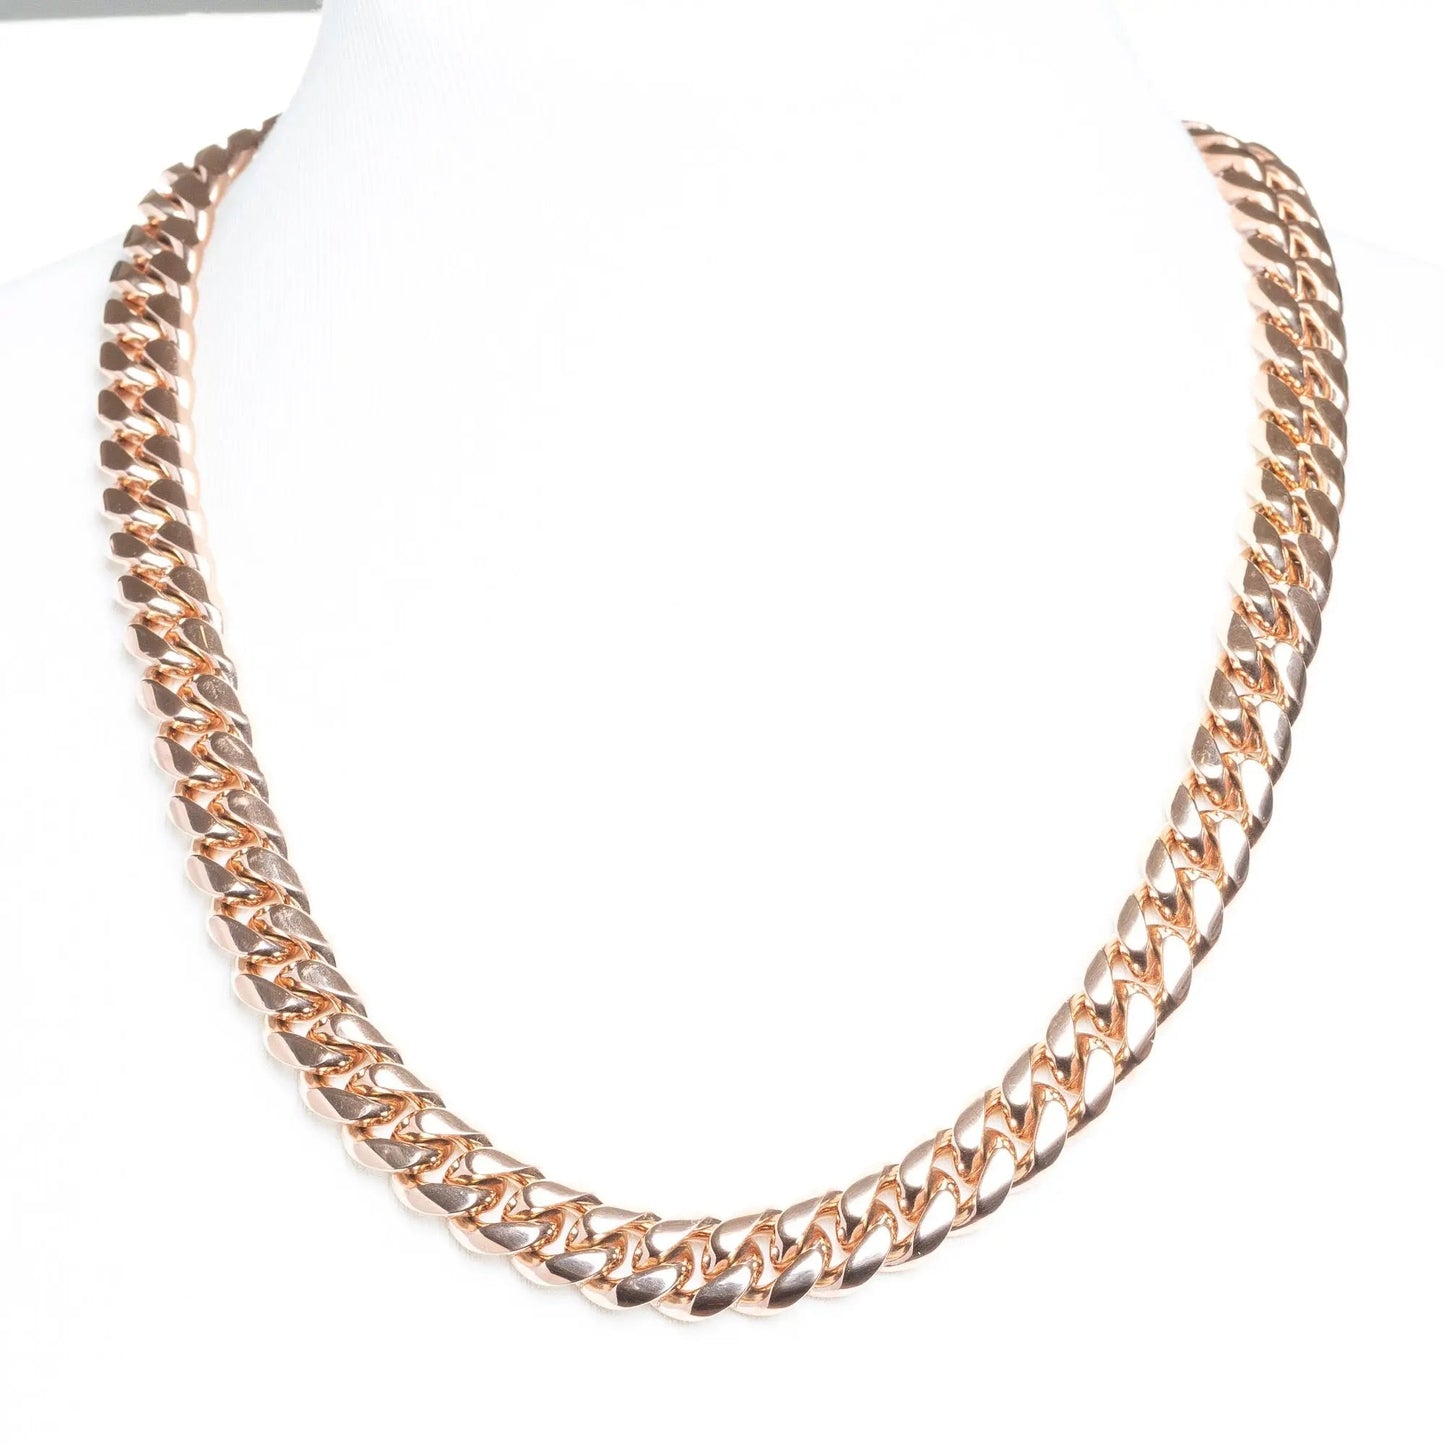  Tyresse 14MM MIAMI CUBAN CHAIN - ROSE GOLD